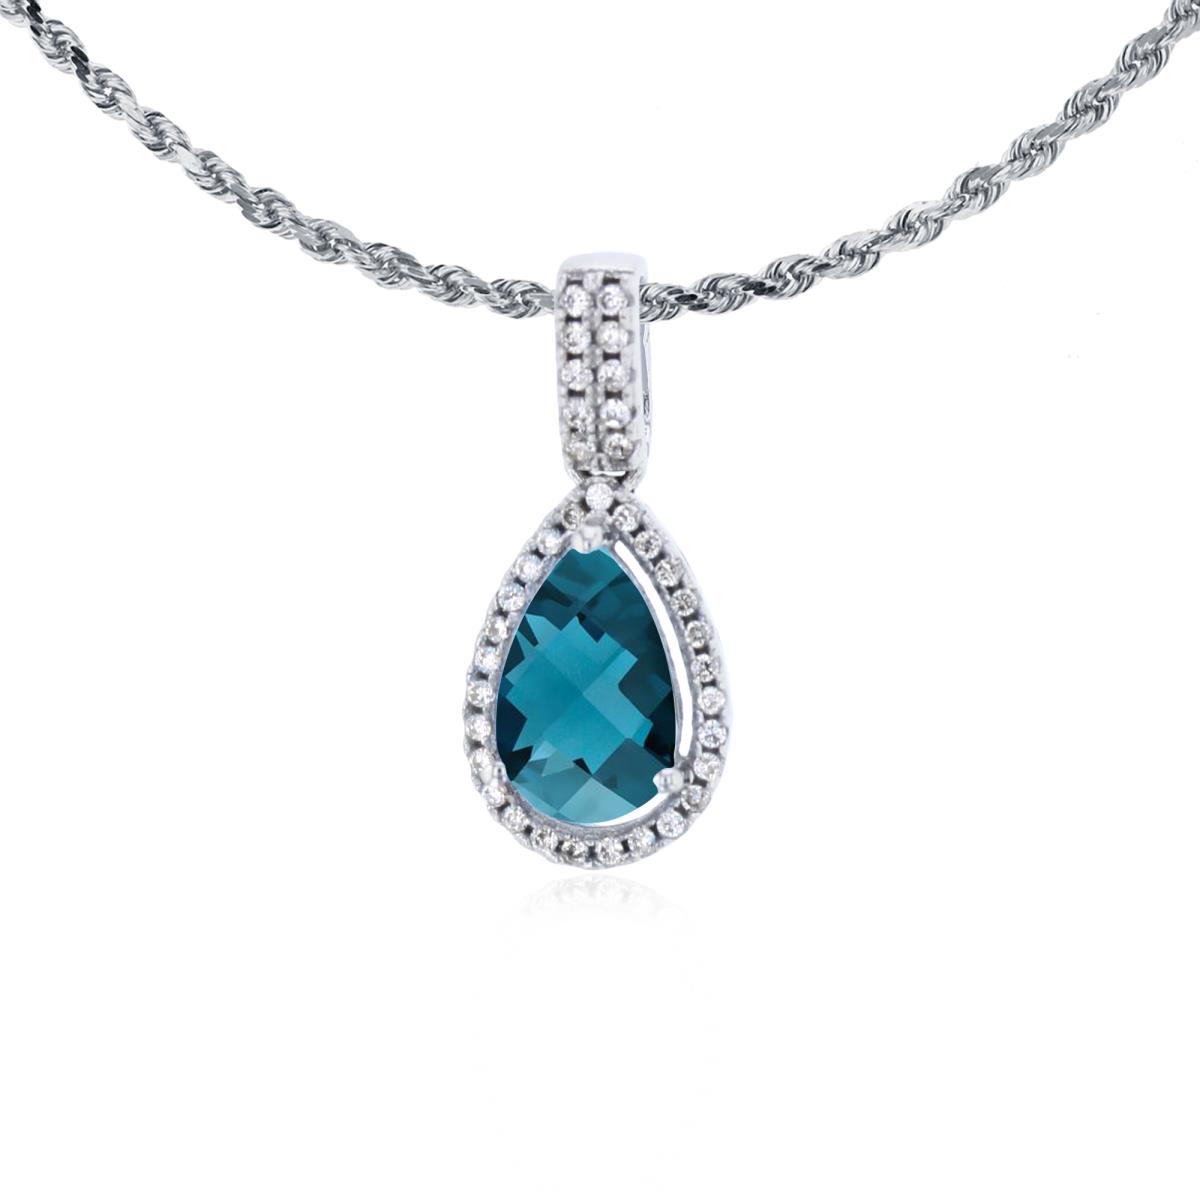 10K White Gold 8x5mm Pear Cut London Blue Topaz & 0.11 CTTW Diamond Halo 18" Rope Chain Necklace